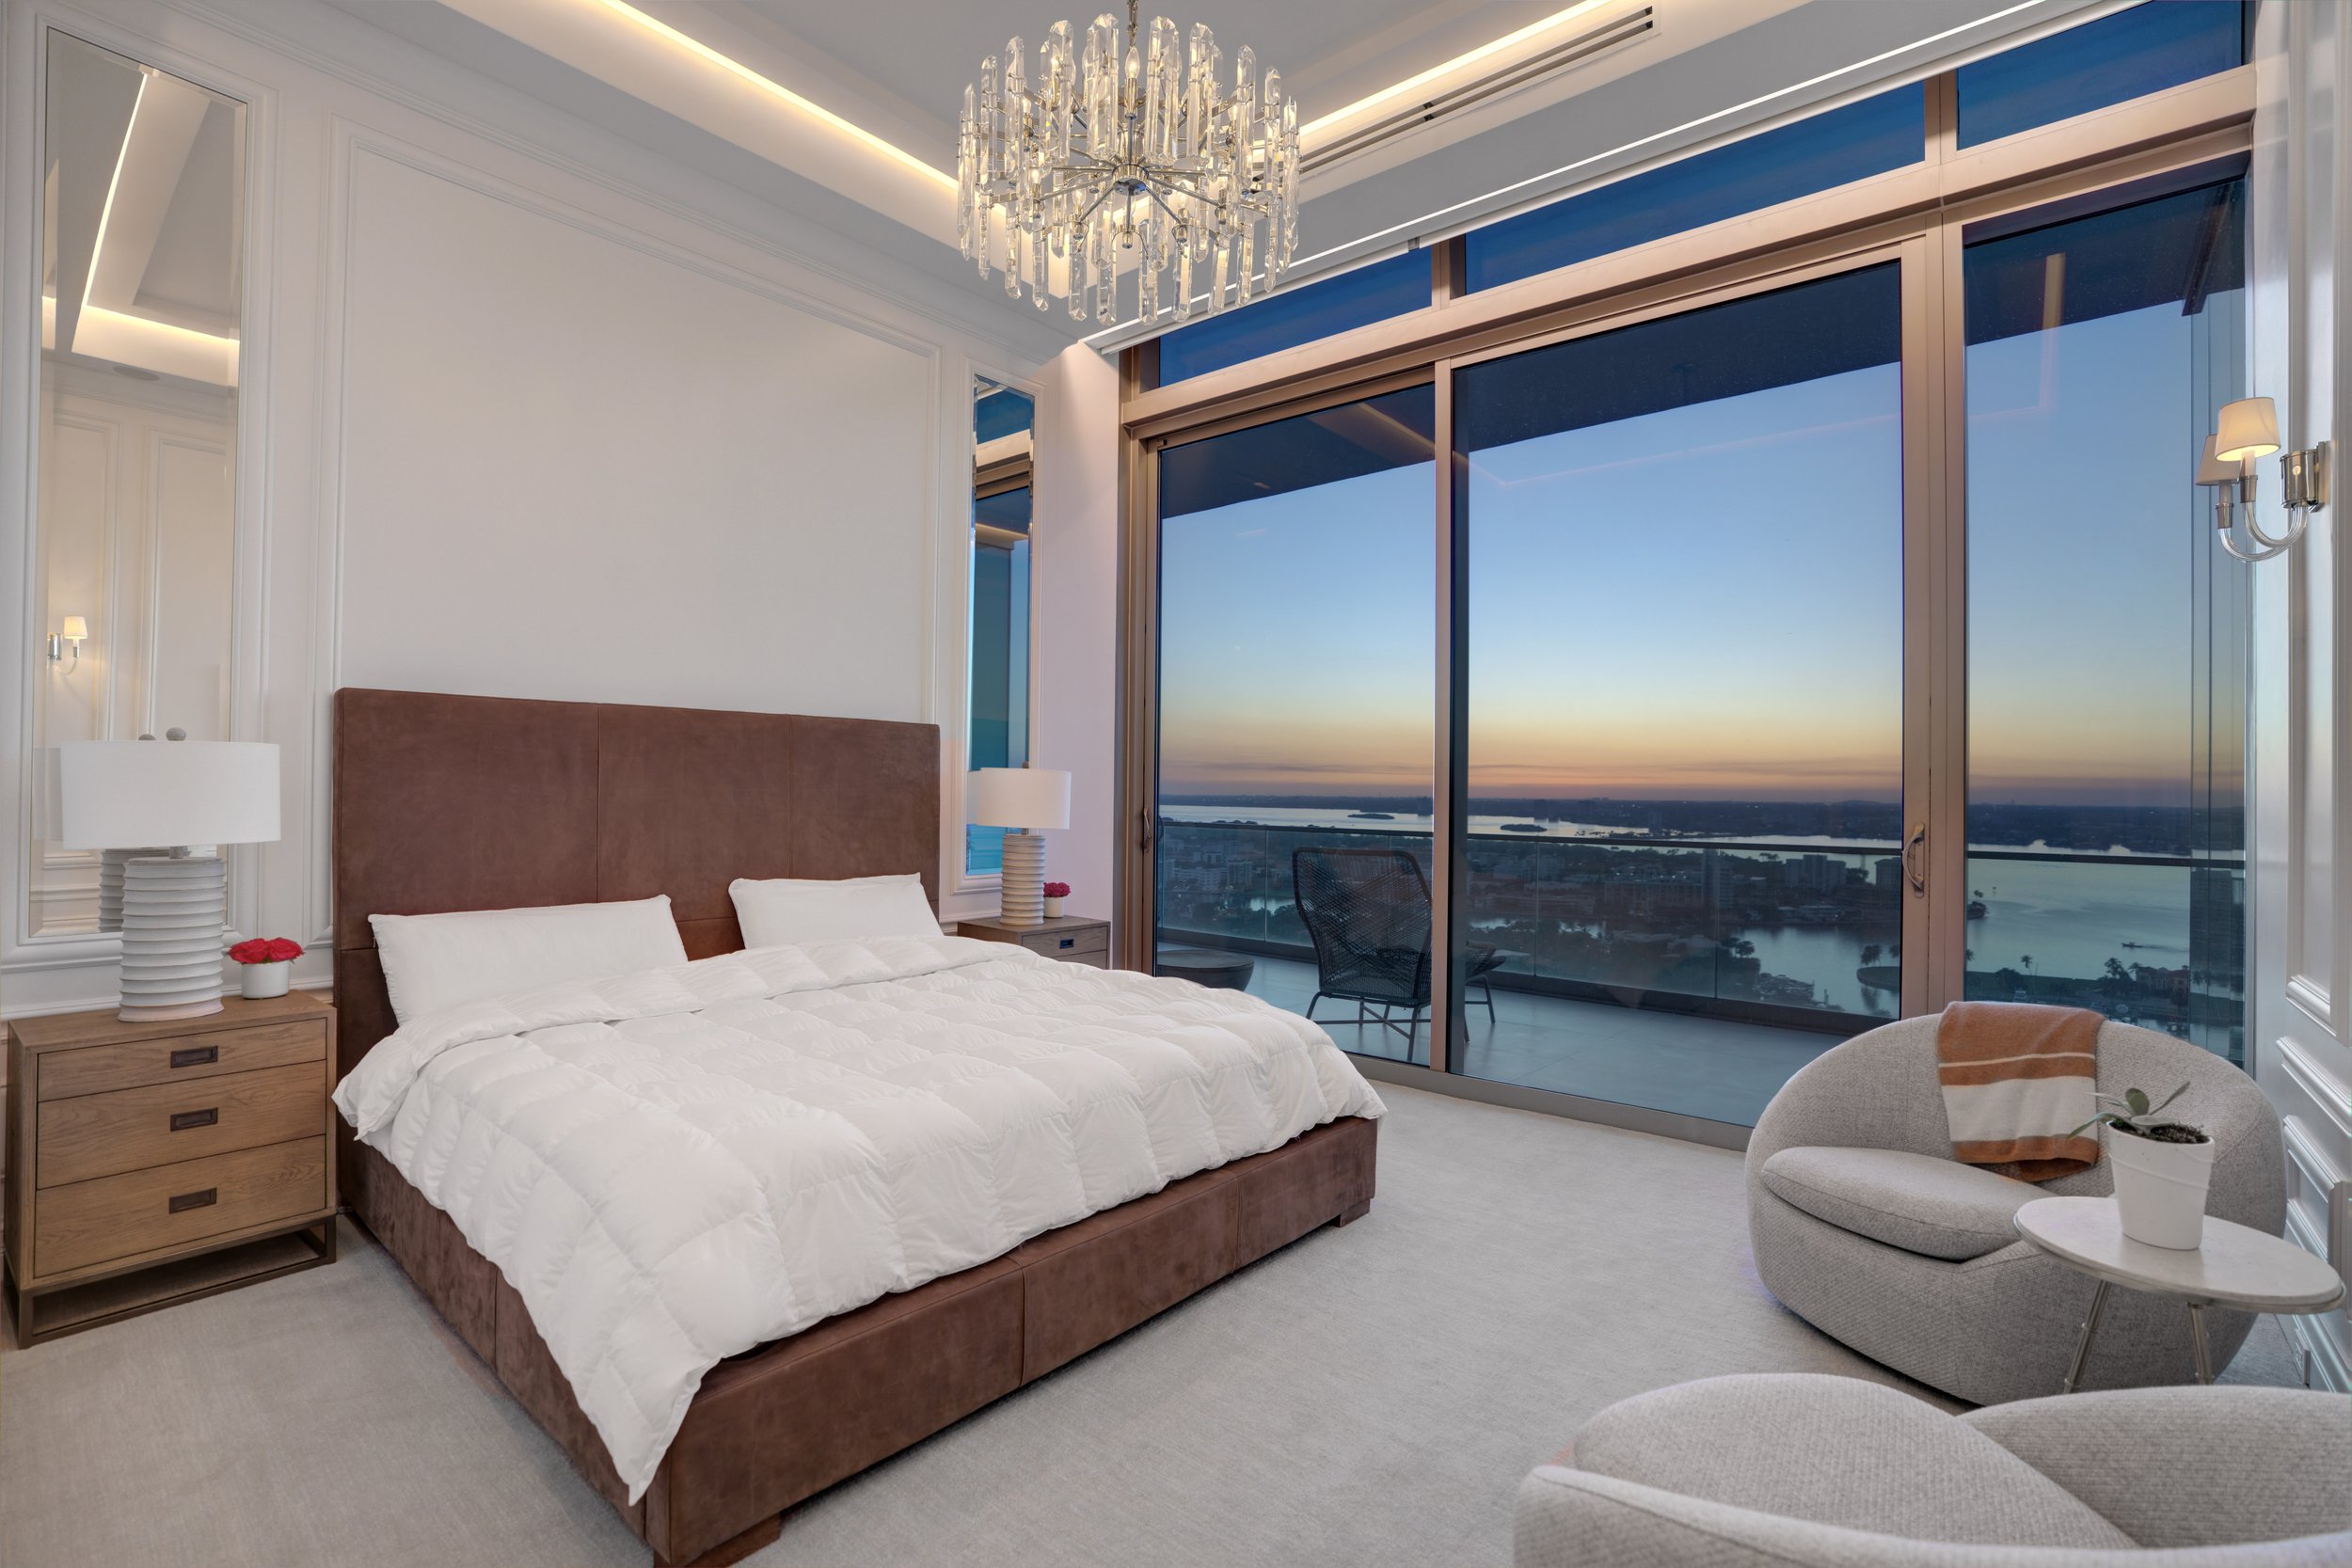 Step Inside This Two-Story Crown Jewel Penthouse At Oceana Bal Harbour Asking $25 Million 24.jpg